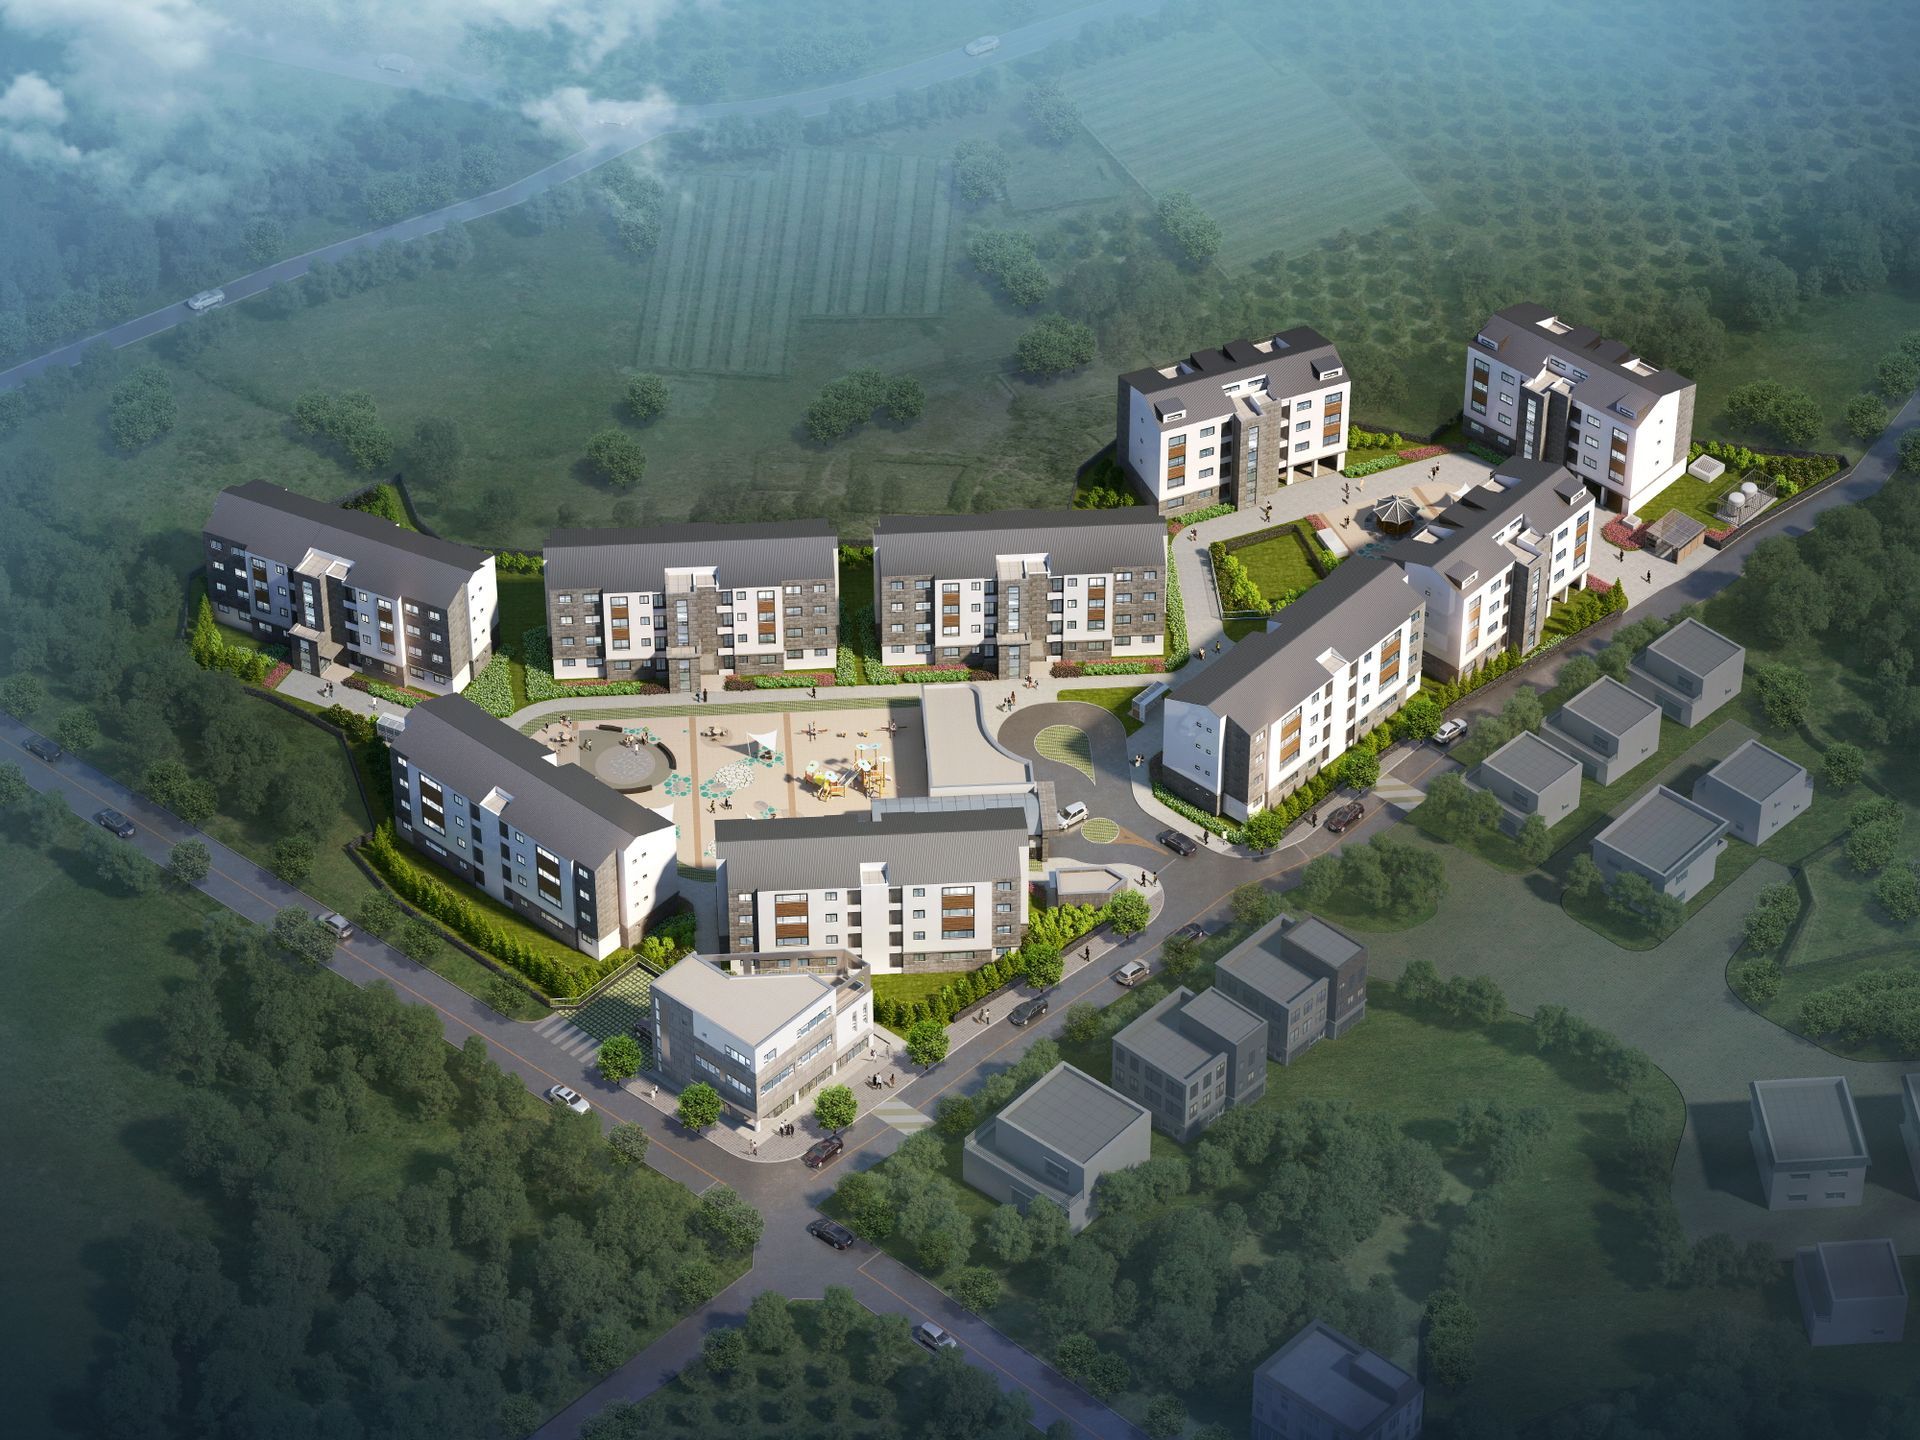 An image depicting a new housing complex being established near international schools in Korea